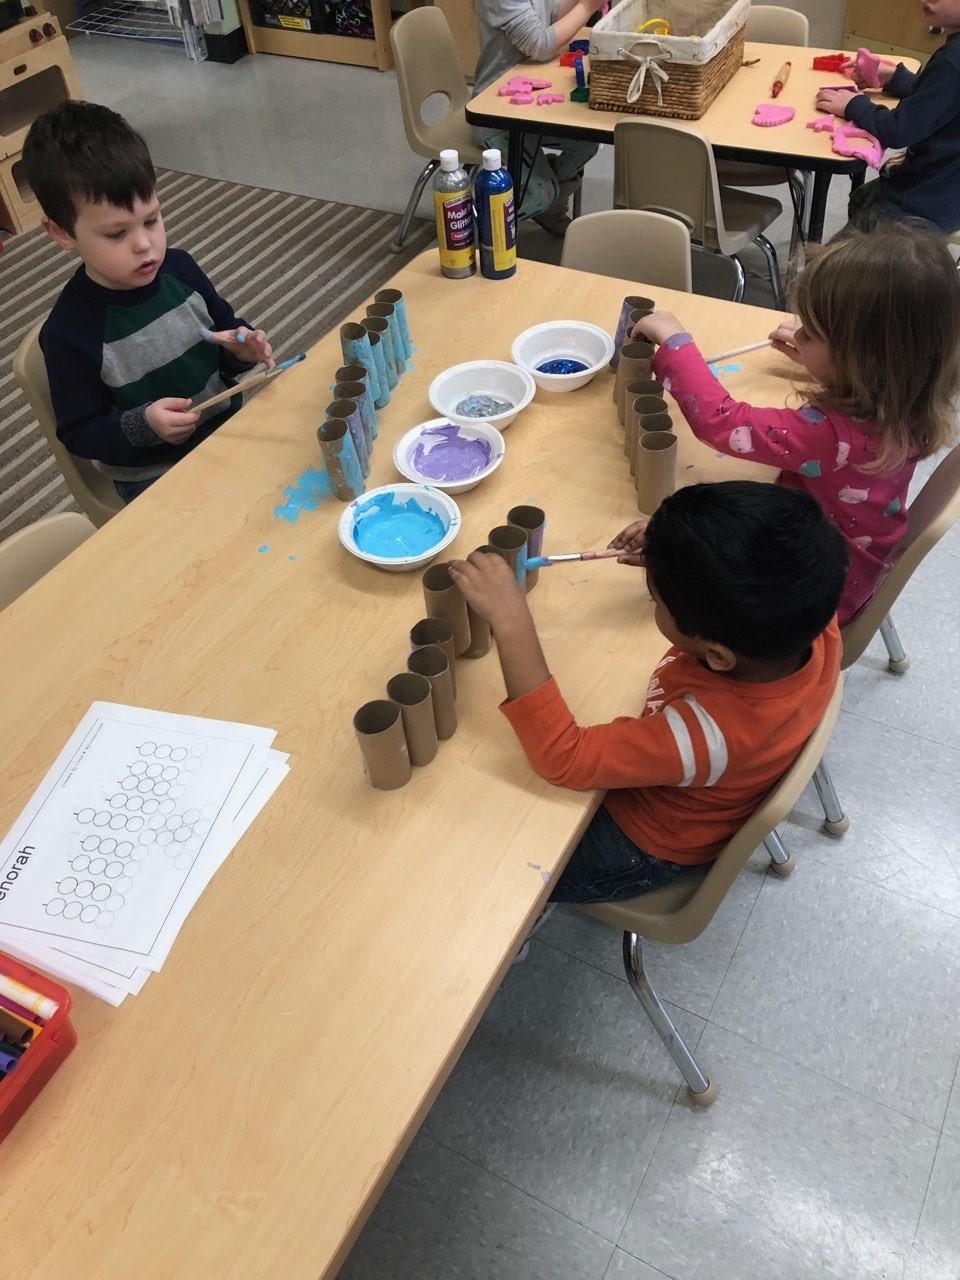 We had fun turning our sensory table into a farm table with farm animals, corn kernels and some small blocks. After we finished with our farm theme, we moved on to Hanukkah.